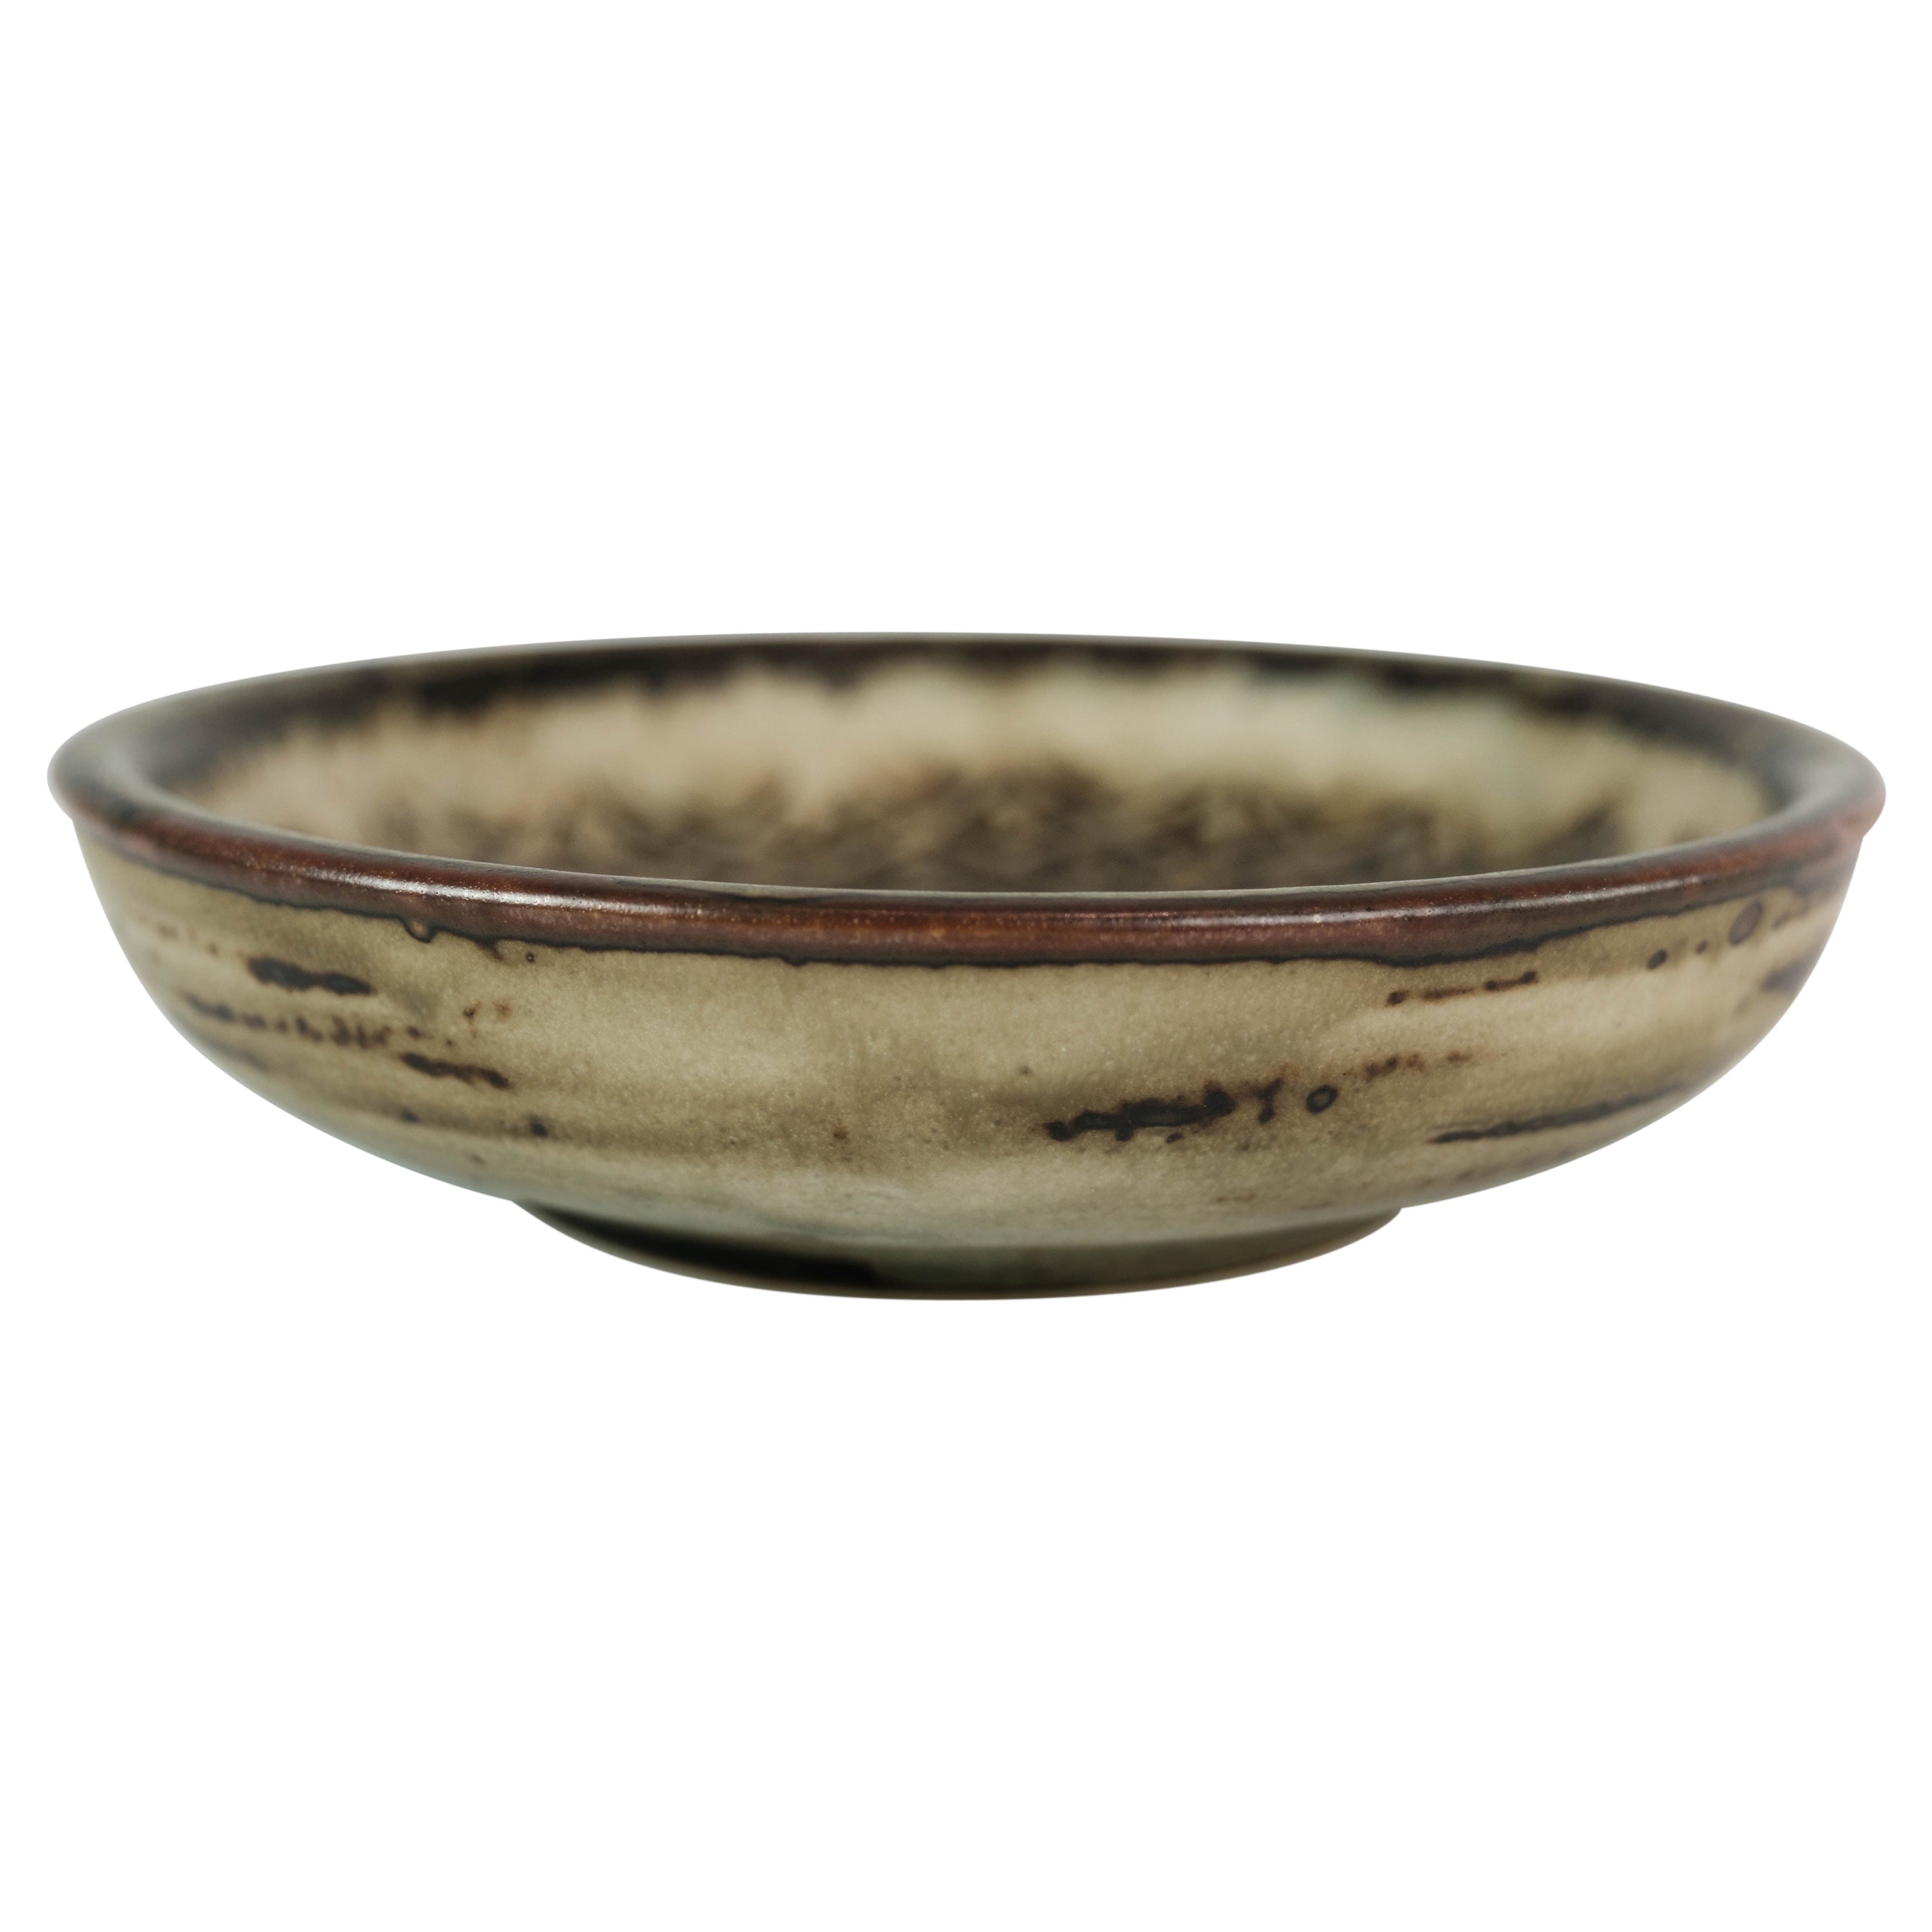 Stoneware Bowl In Brown Colors No. 21567 By Gerd Bøgelund From 1960s